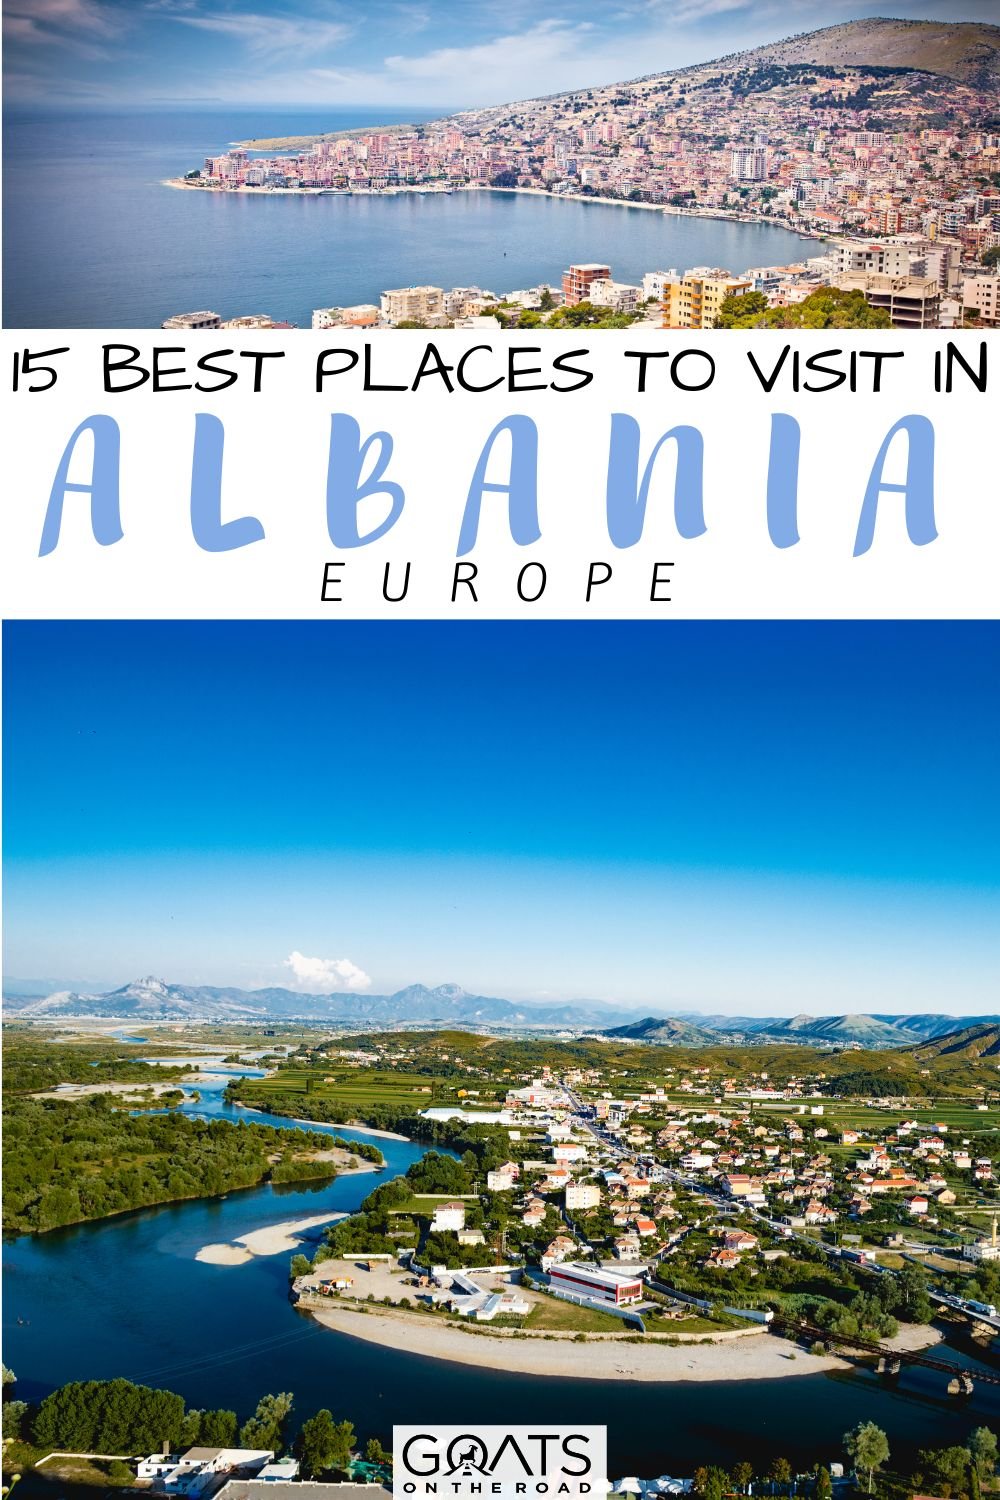 “15 Best Places To Visit in Albania